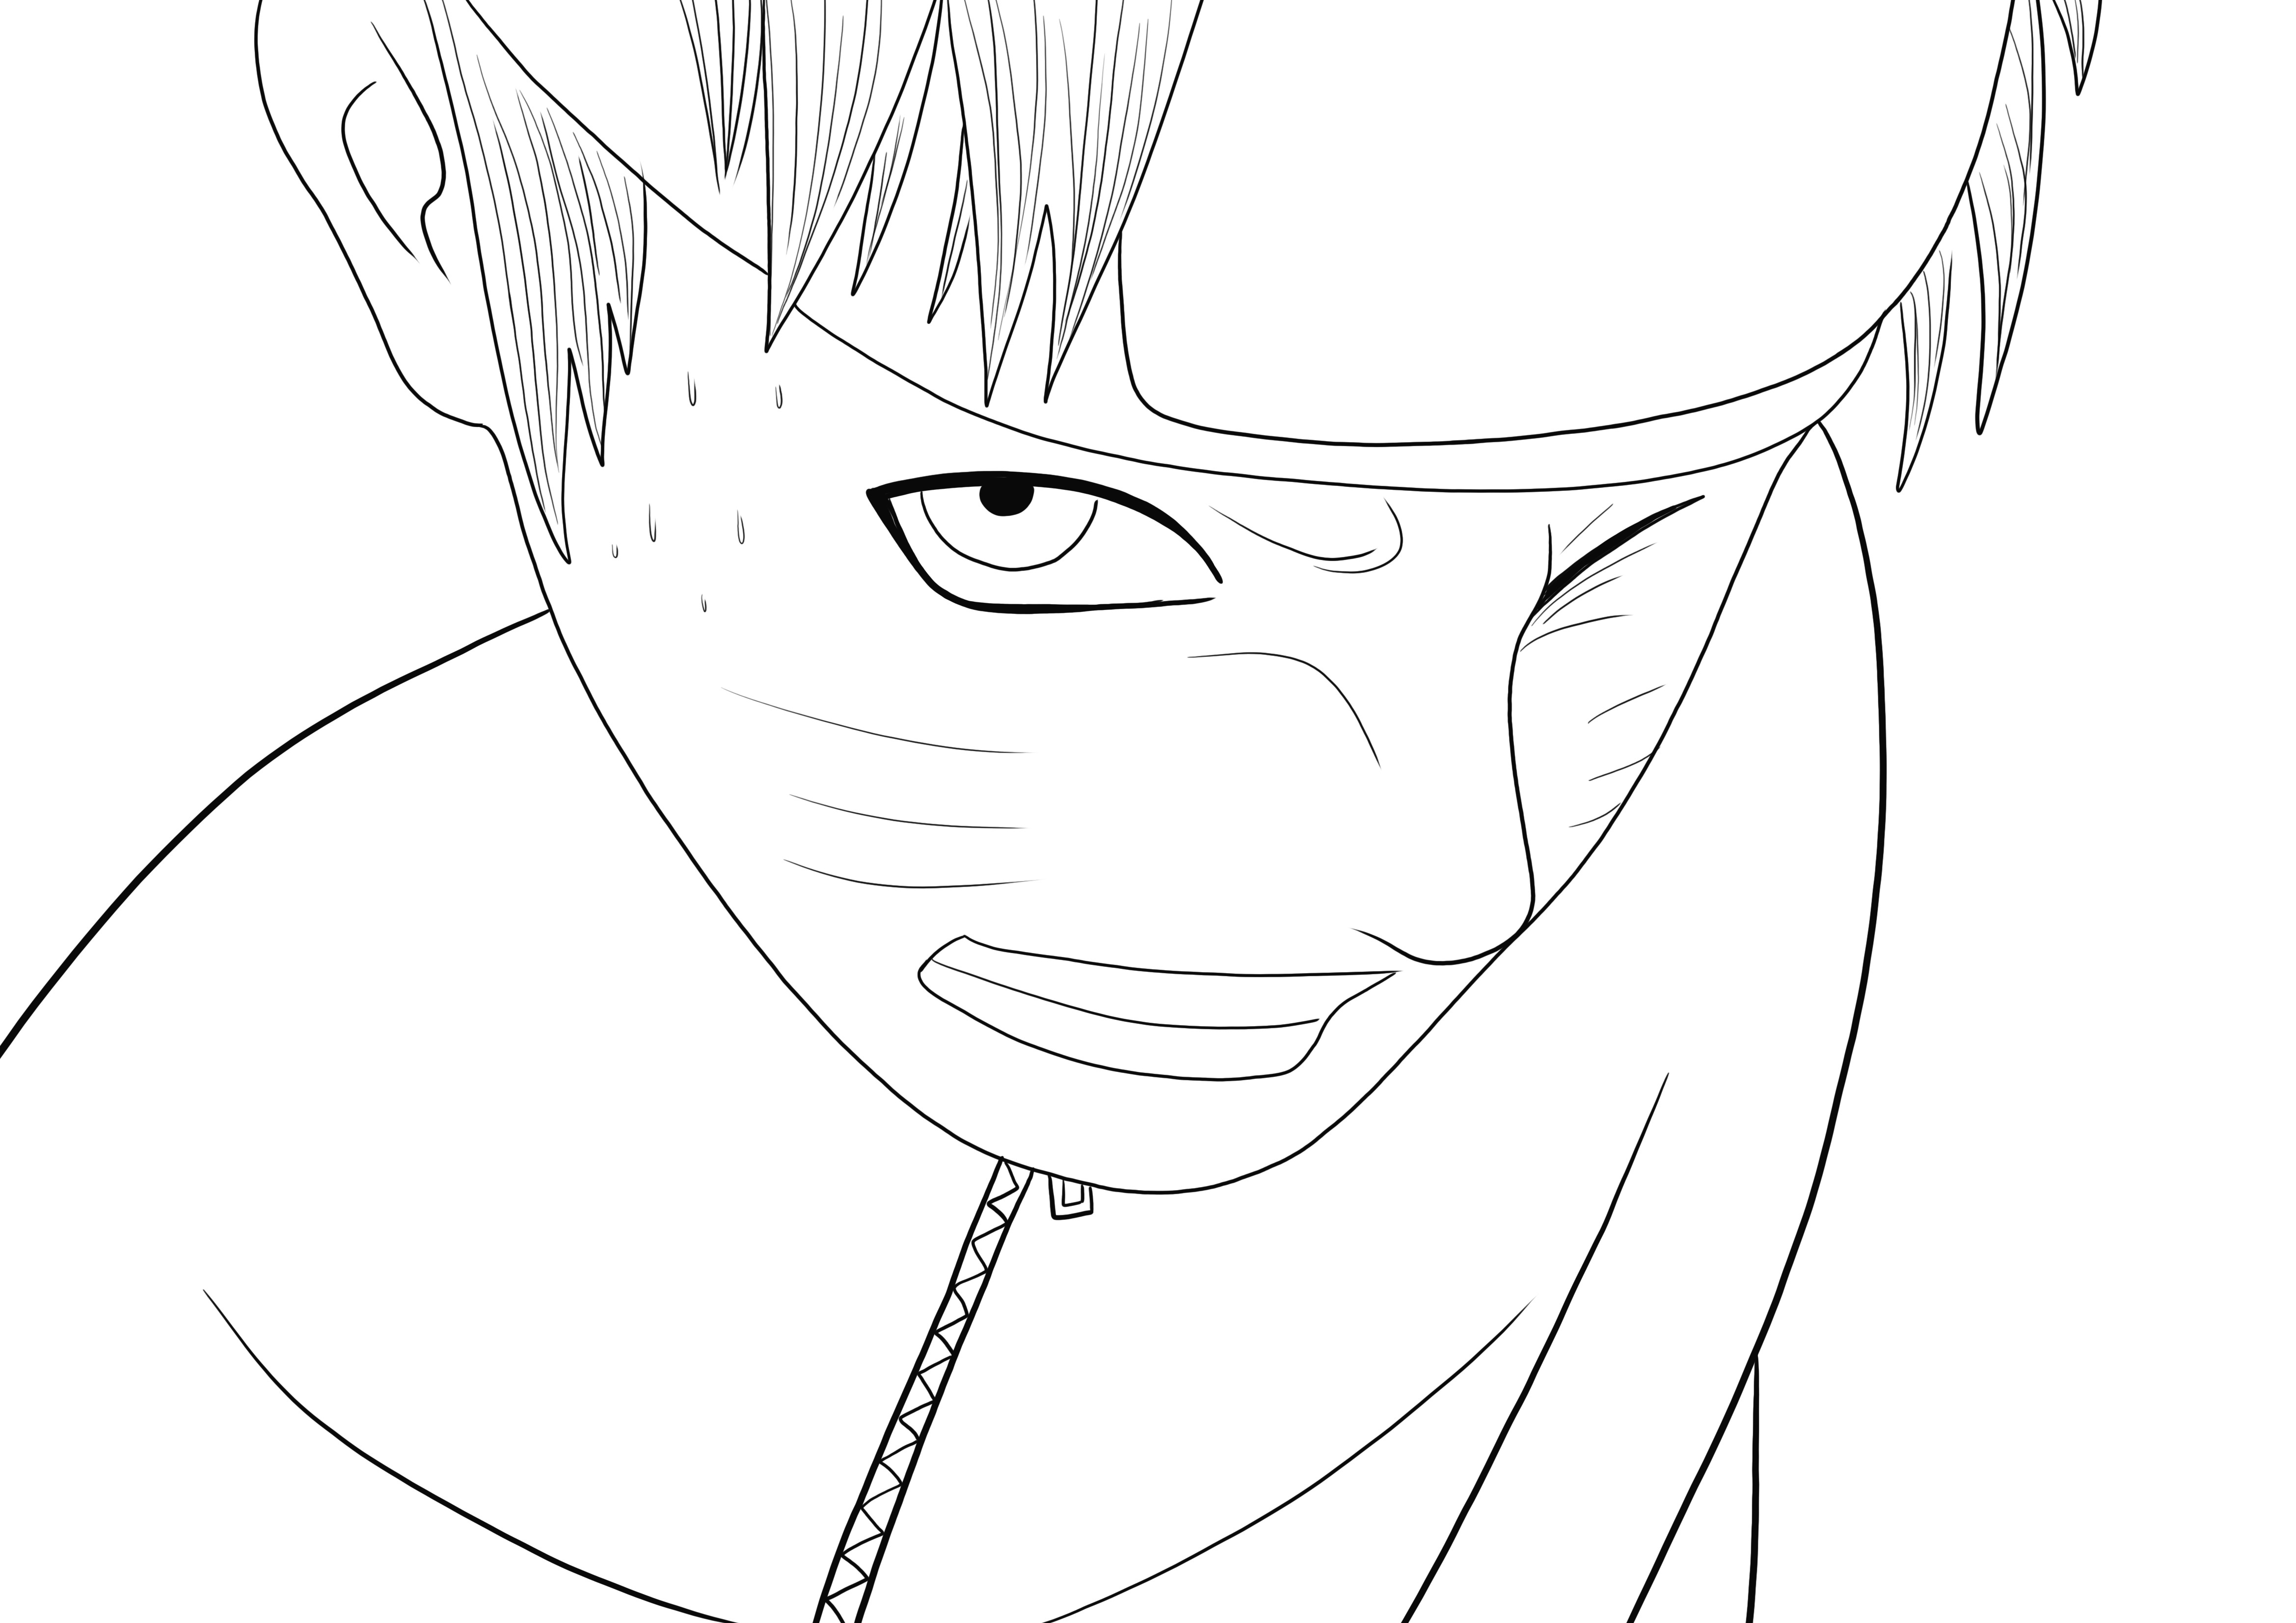 Download our free printable picture of angry Naruto and have fun while coloring